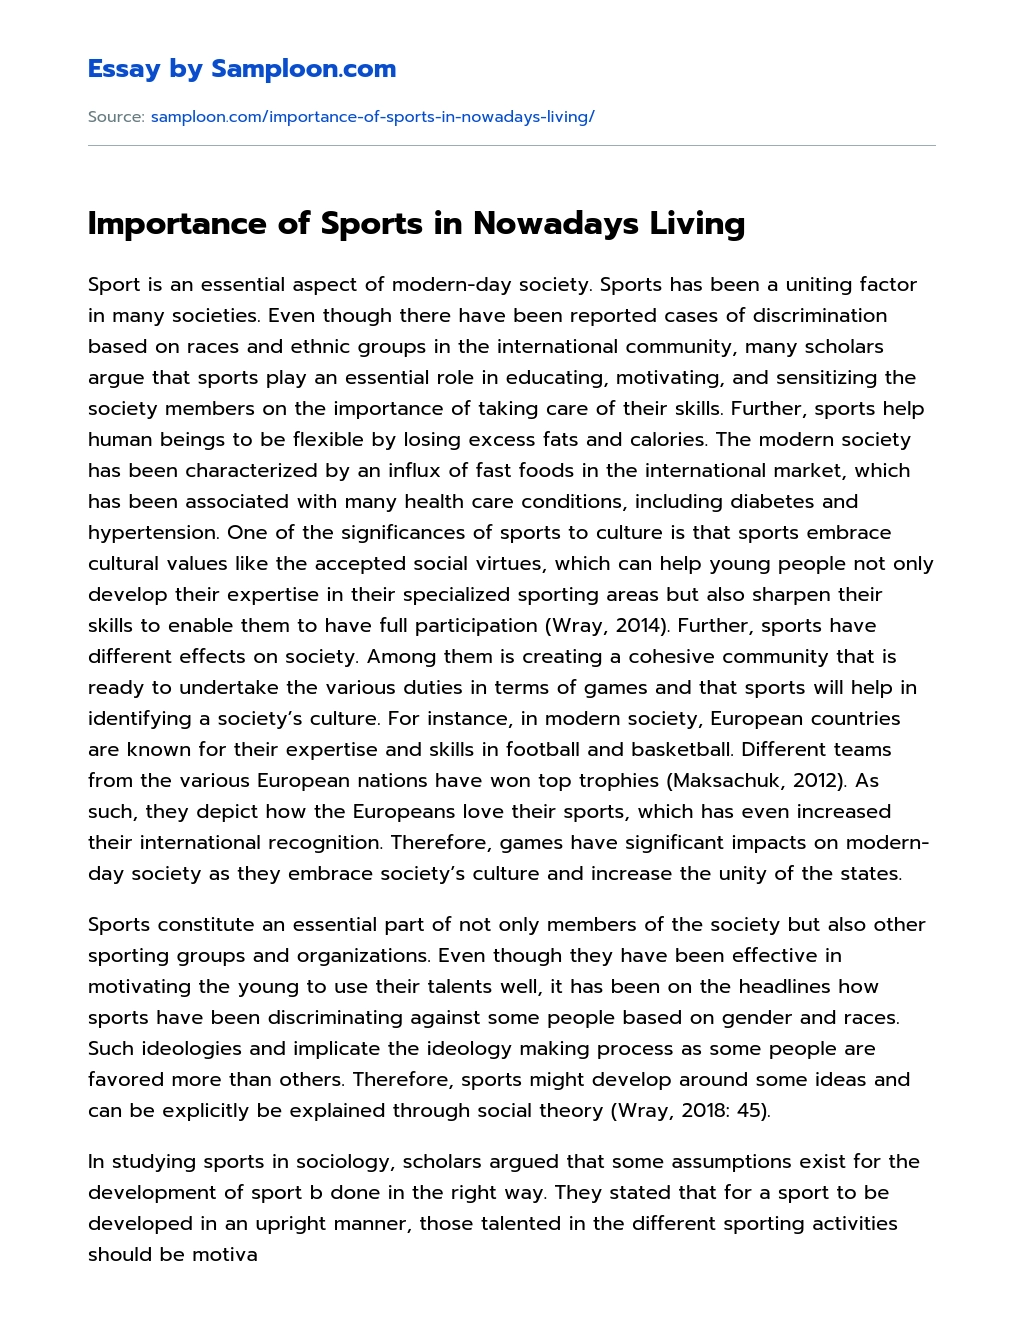 Importance of Sports in Nowadays Living essay